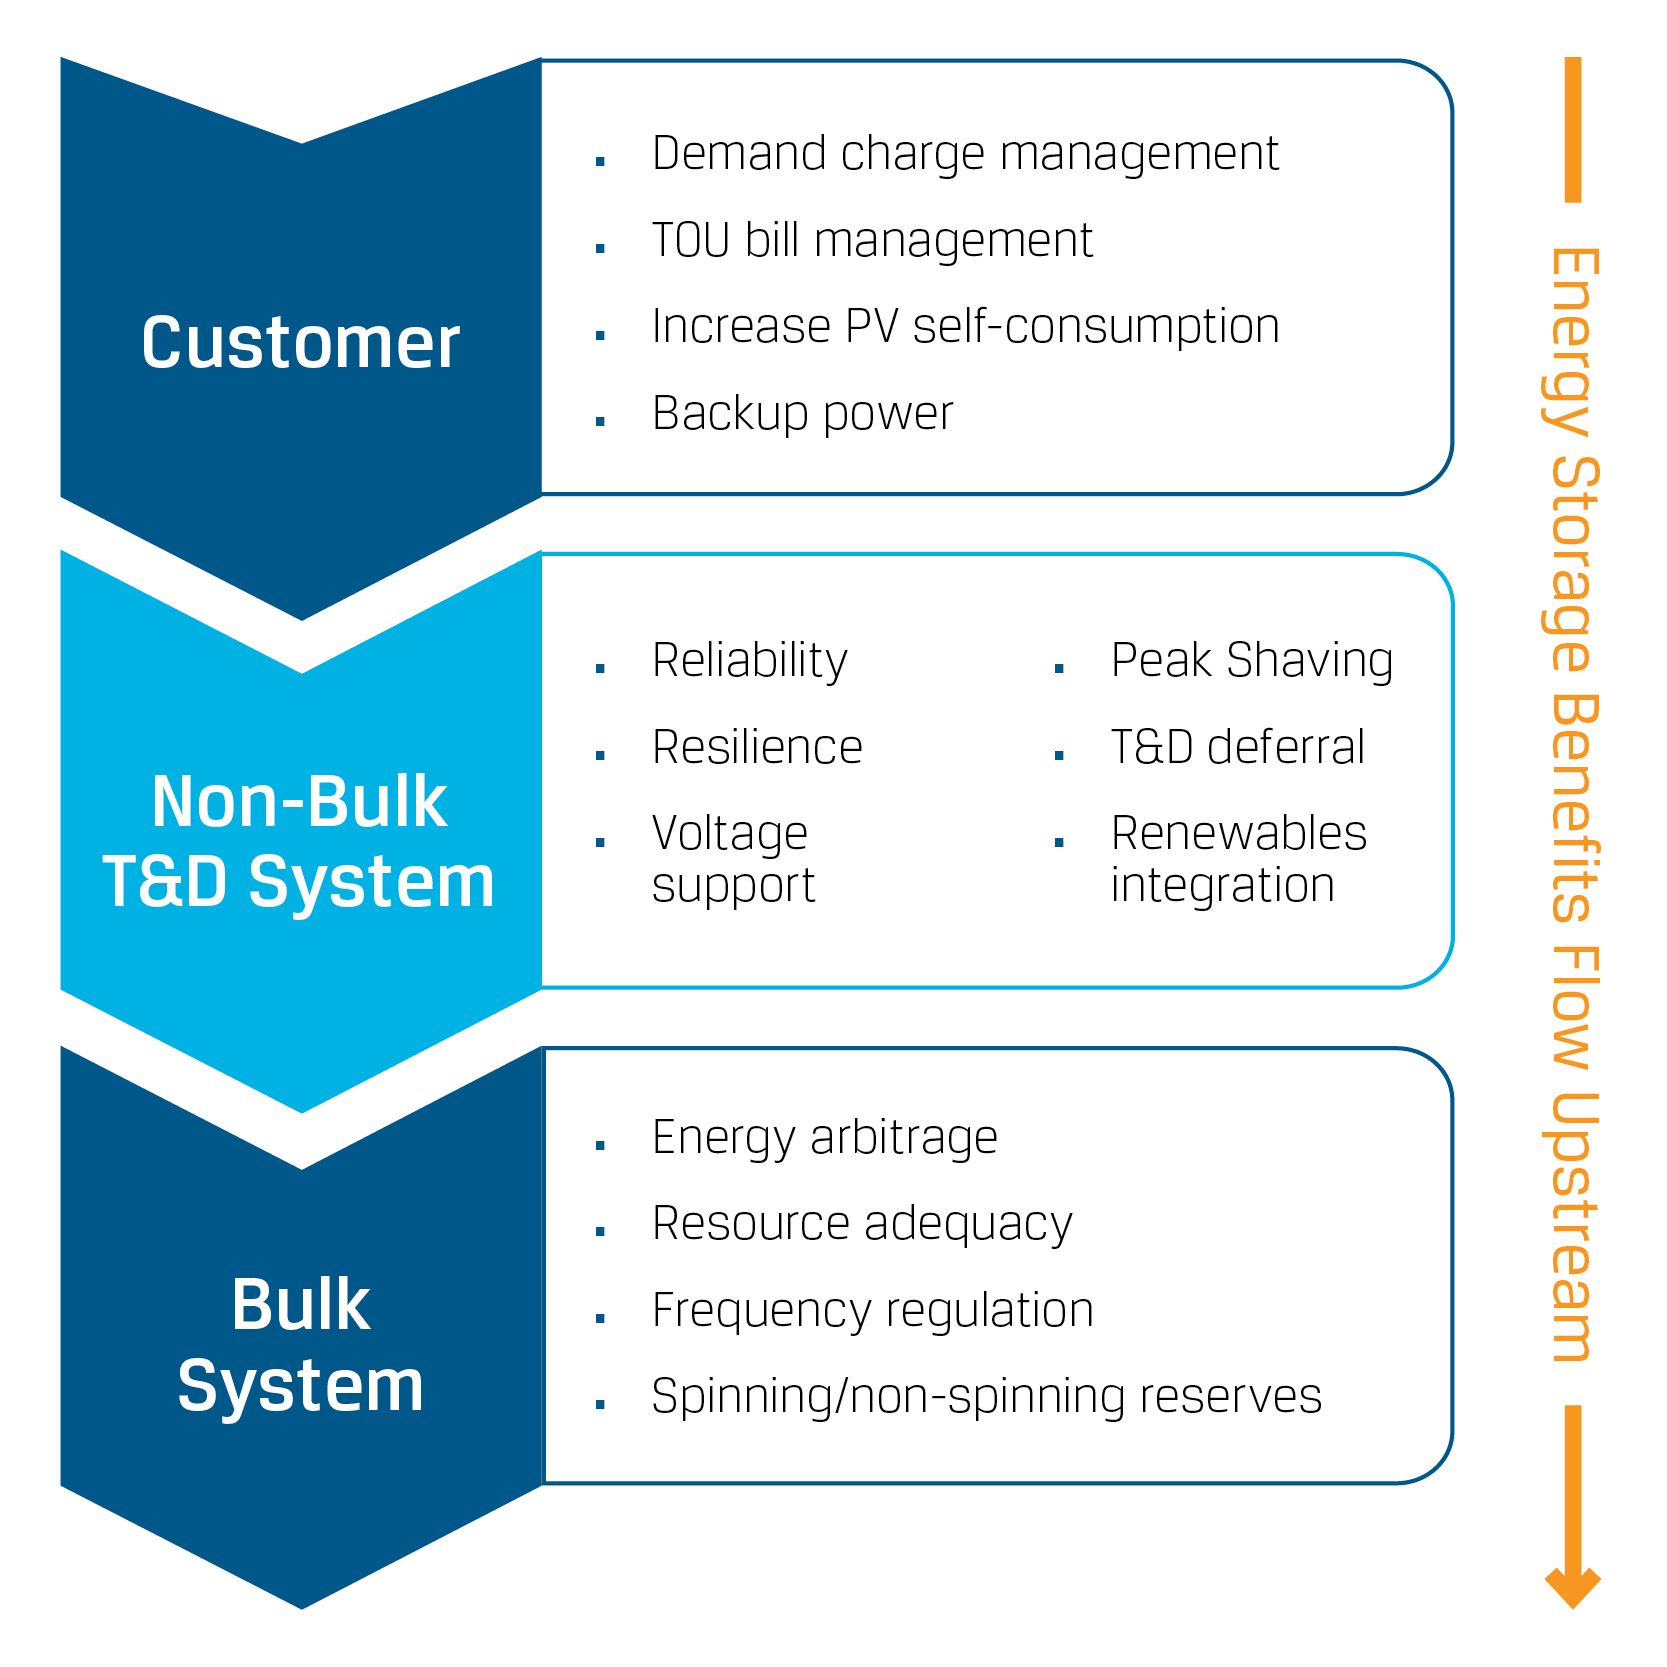 Utility storage graphic showing the path of customer to non-bulk T&D systems to a bulk system